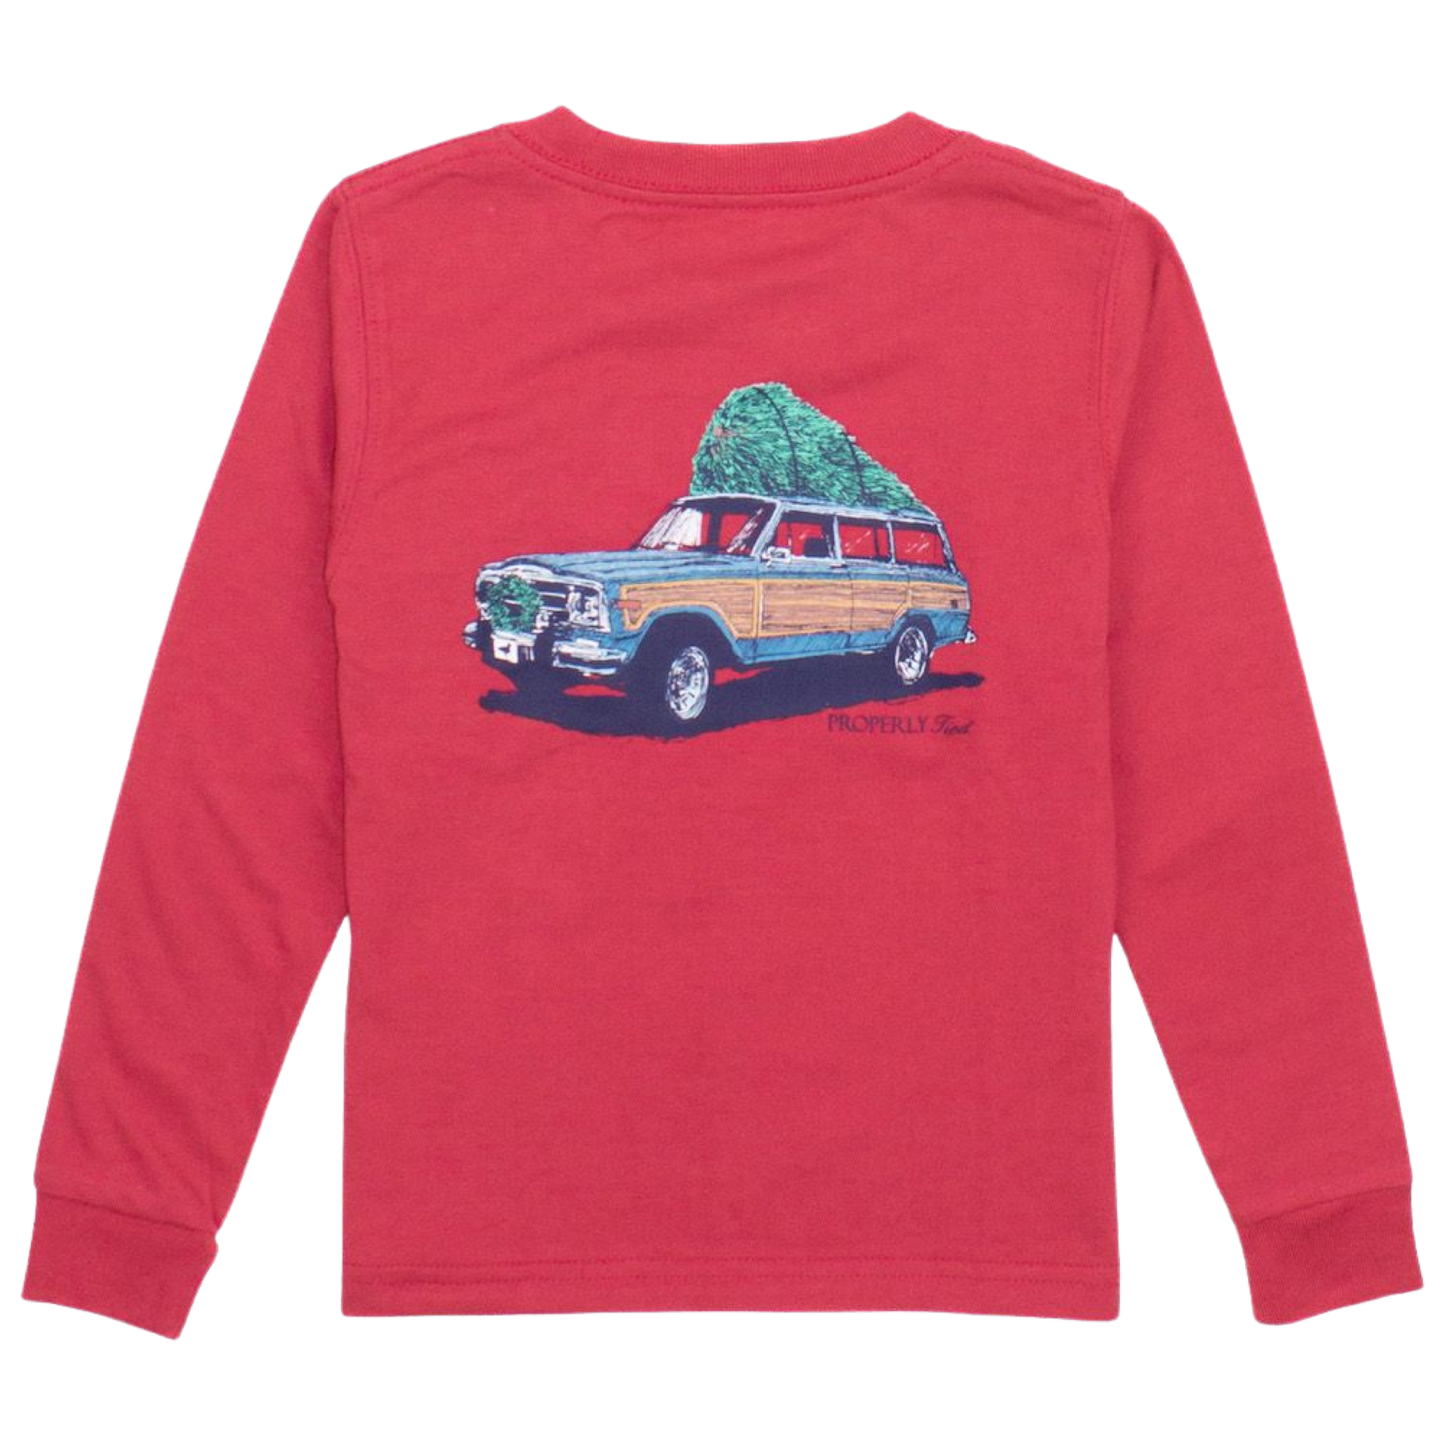 Properly Tied LS Tee - Holiday Car